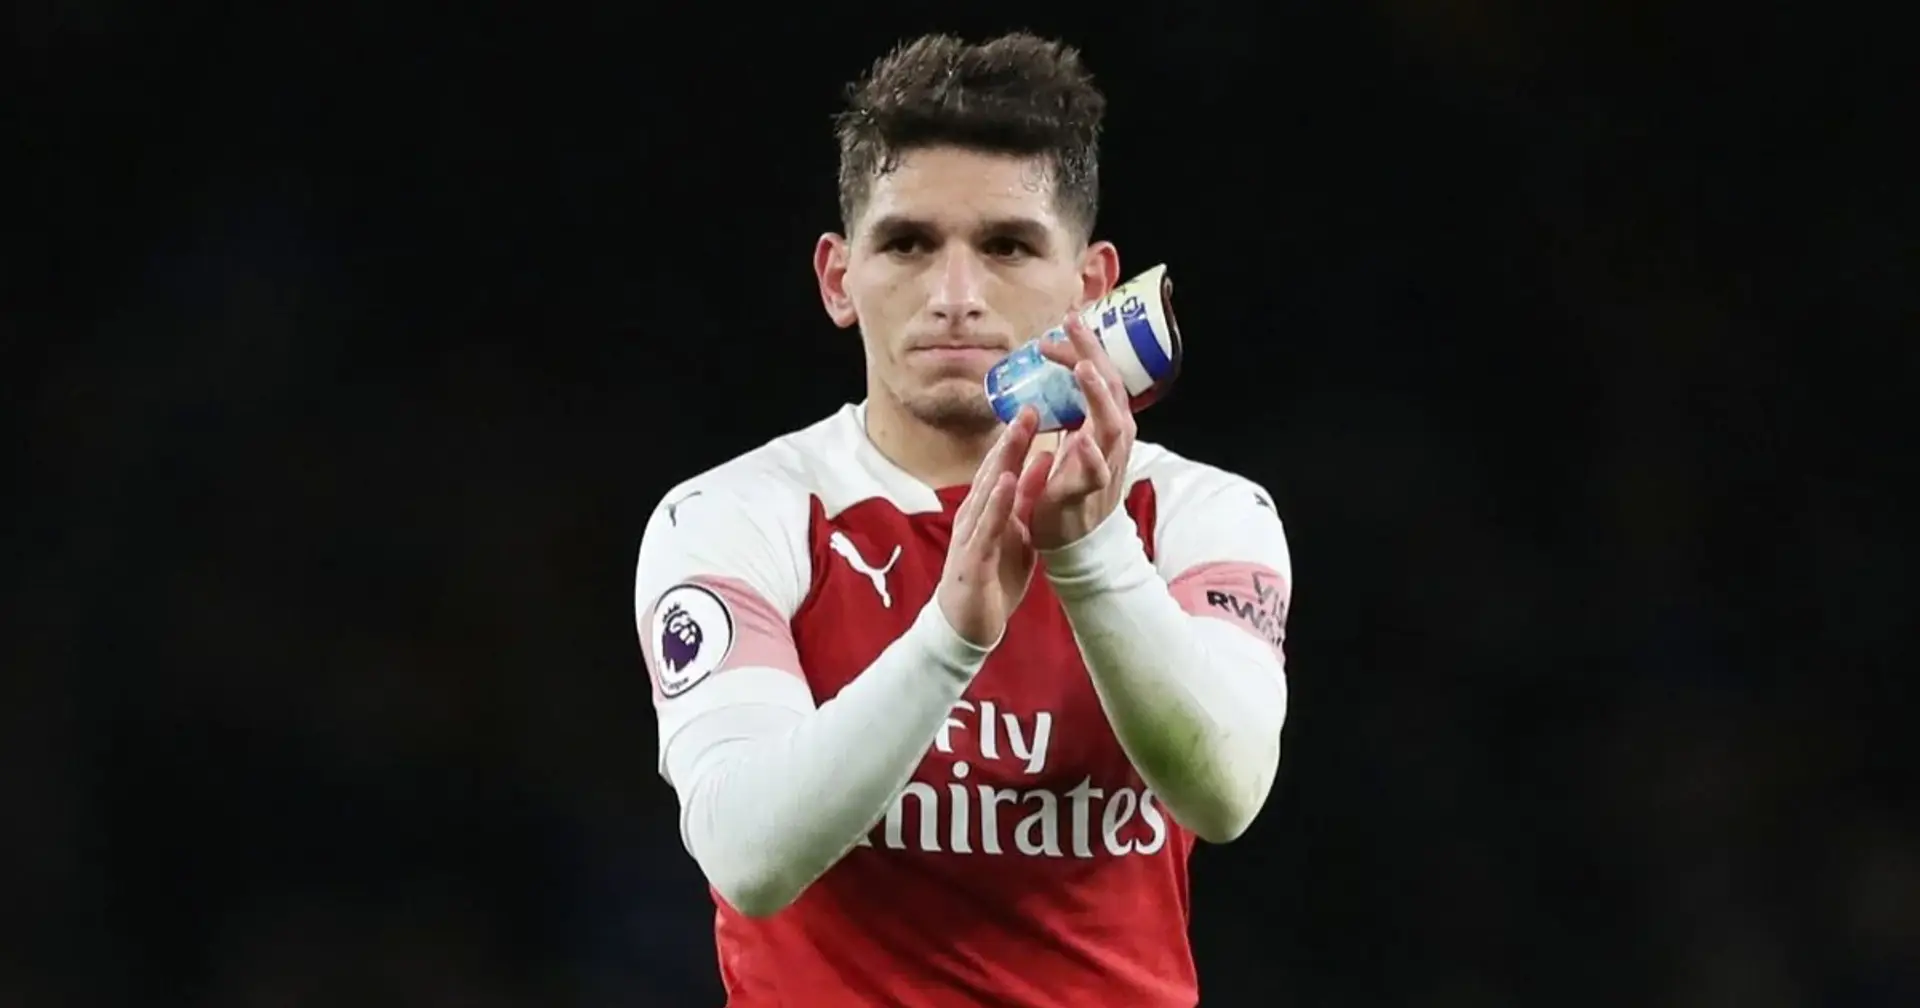 When Arsenal found new Vieira, they discovered they no longer need one – how and why Torreira's spell ends in tears